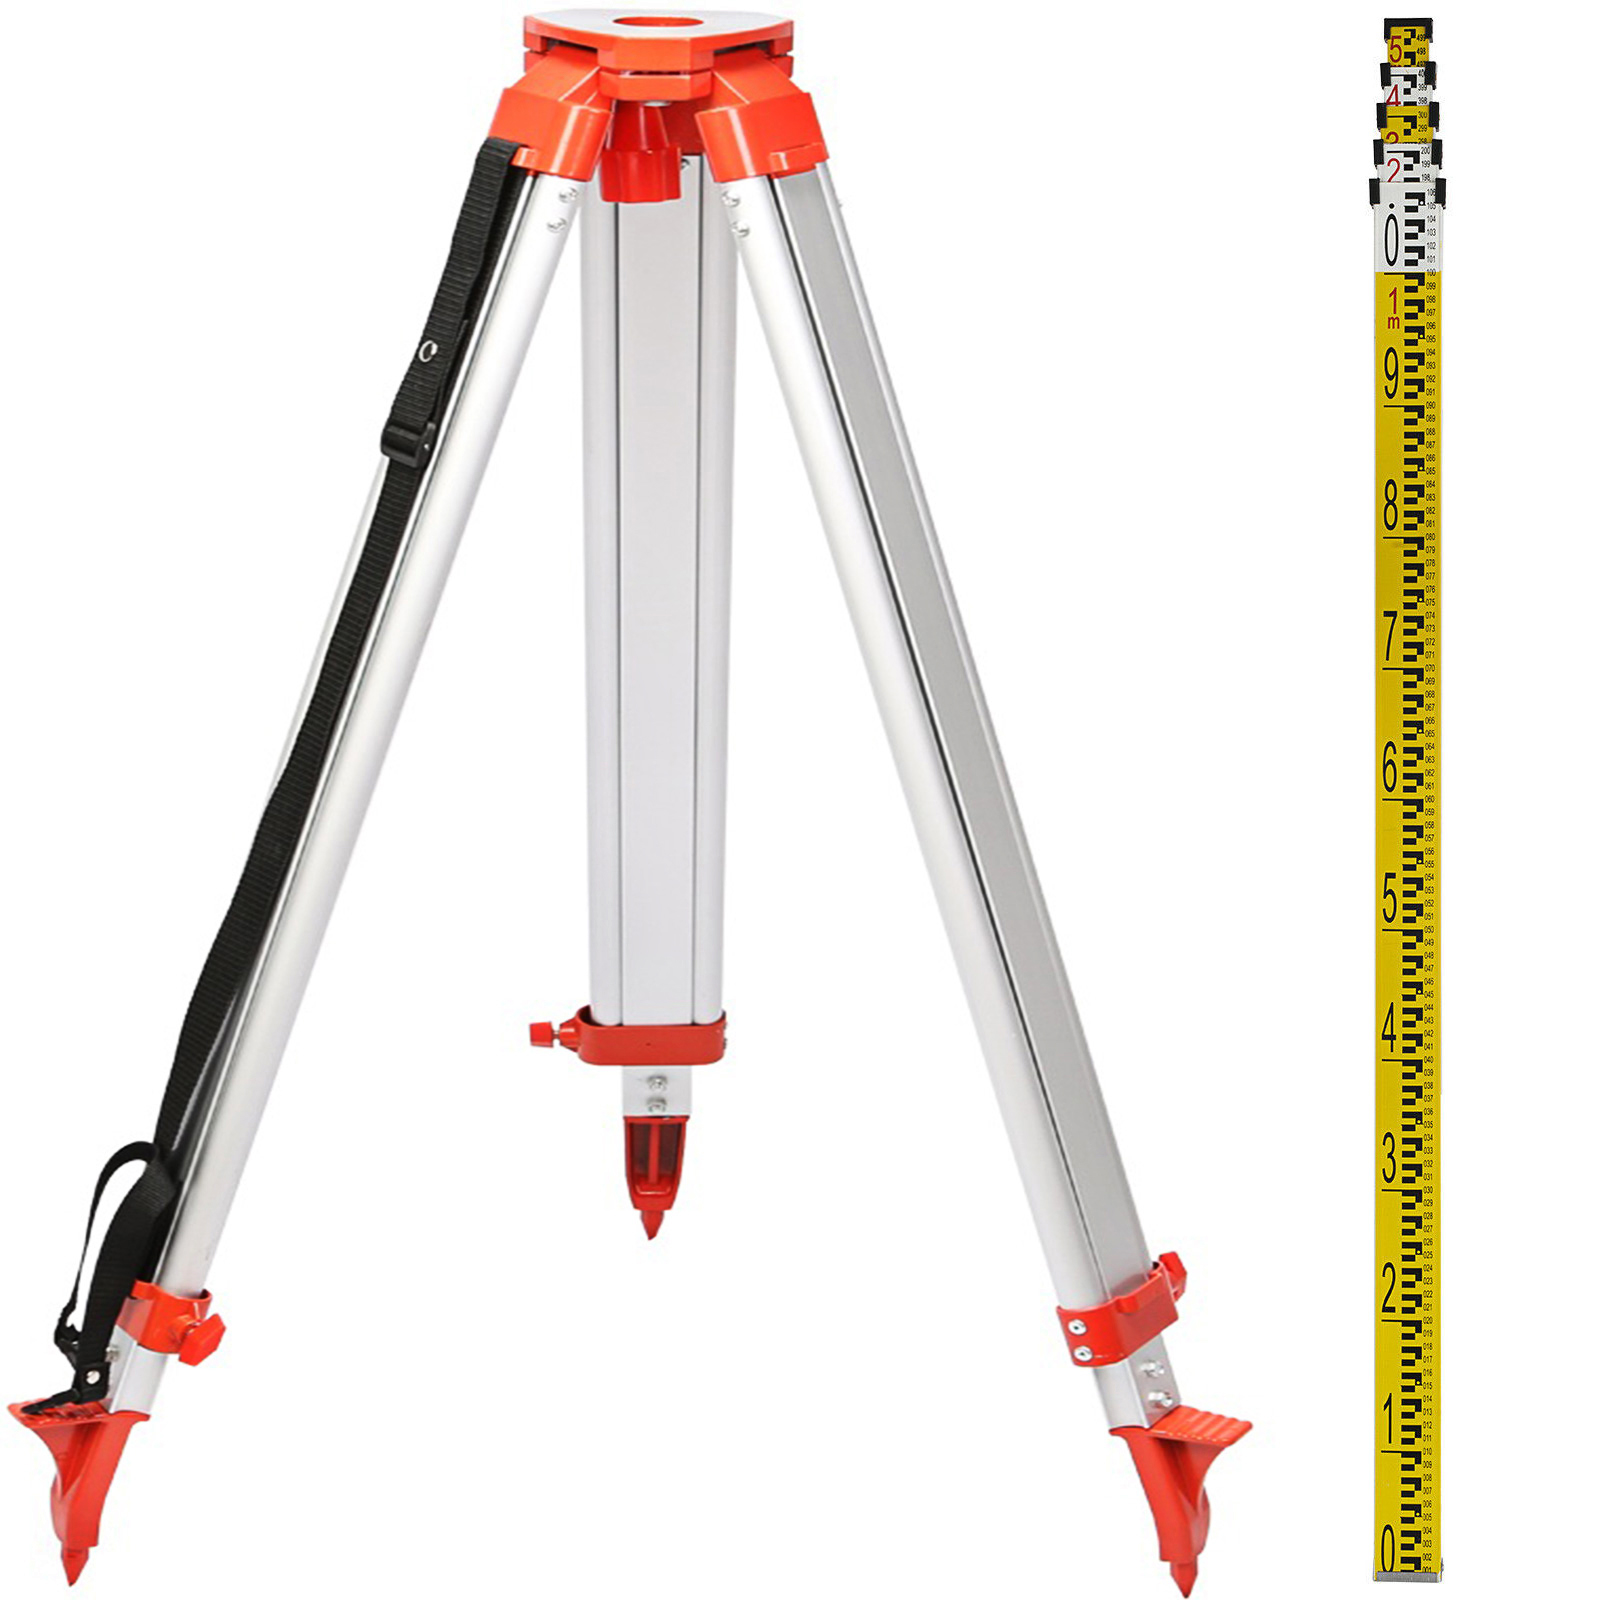 Heavy Duty Survey wooden tripod stand for theodolite auto level heavy duty  stand